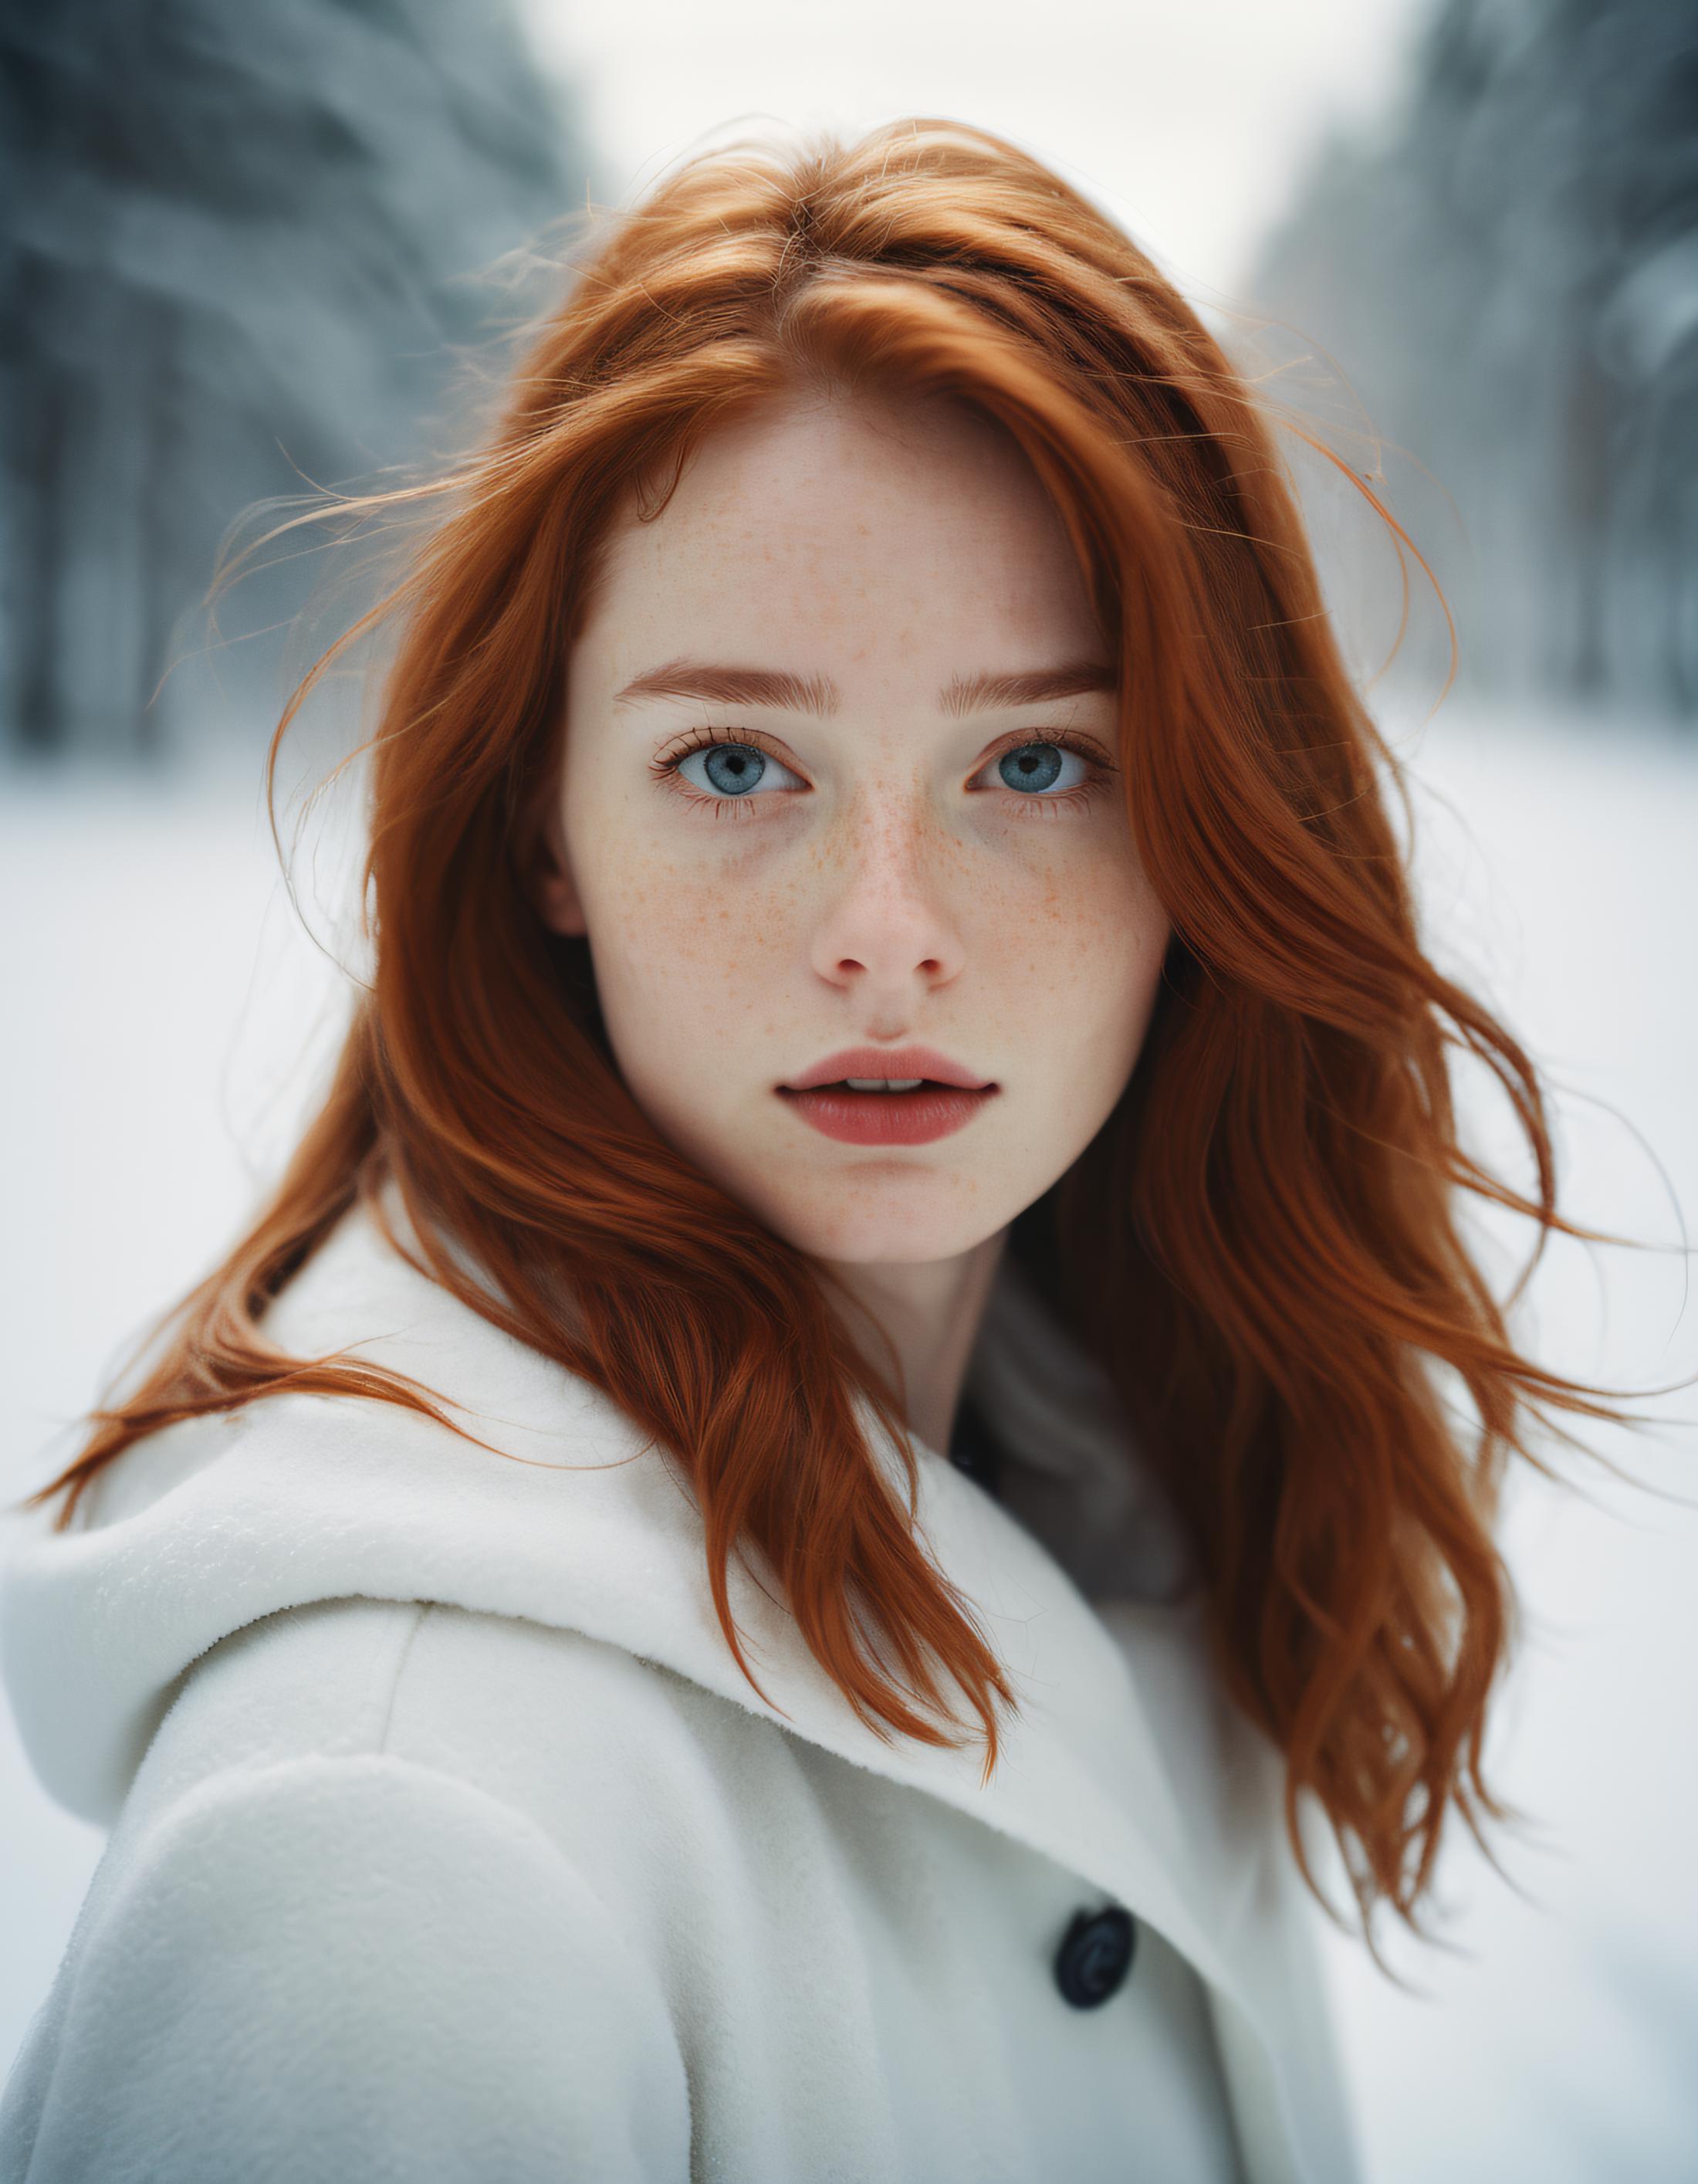 A woman with red hair wearing a white jacket.